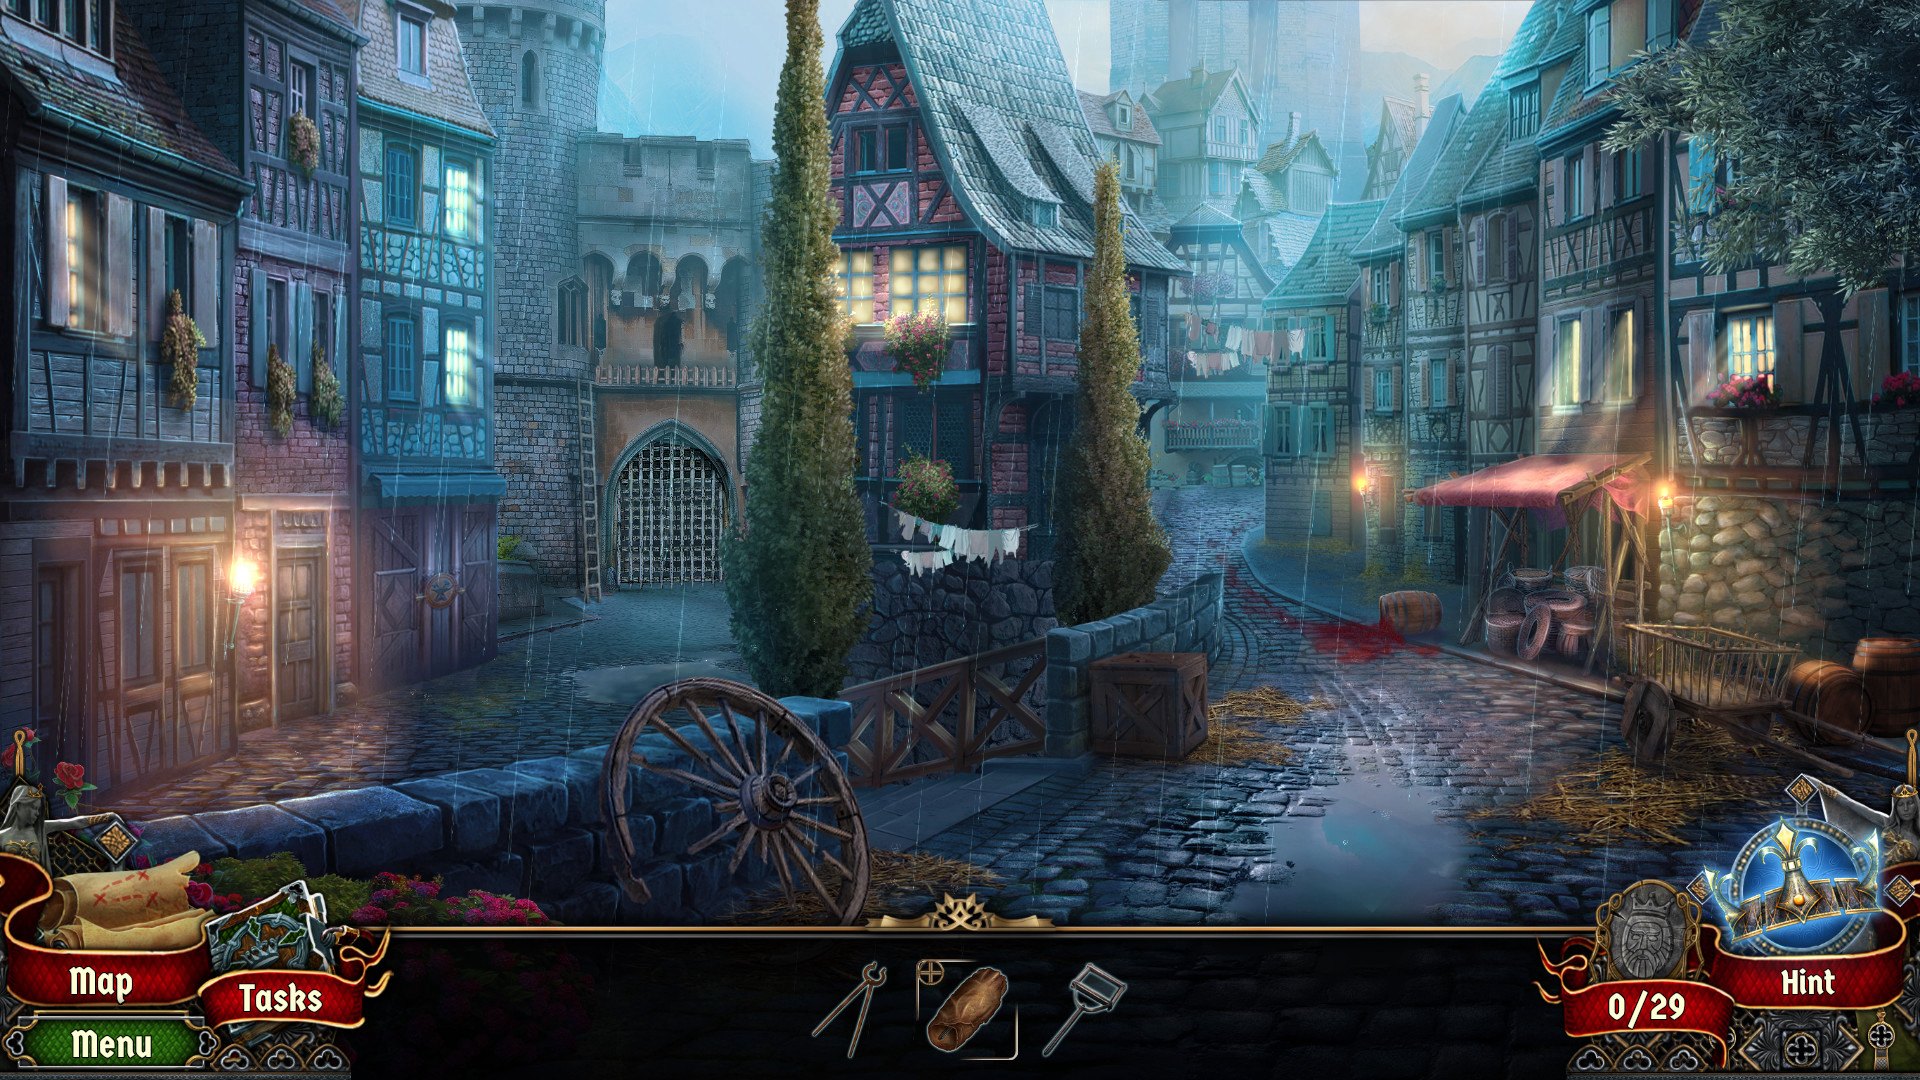 Kingmaker: Rise To The Throne Steam CD Key